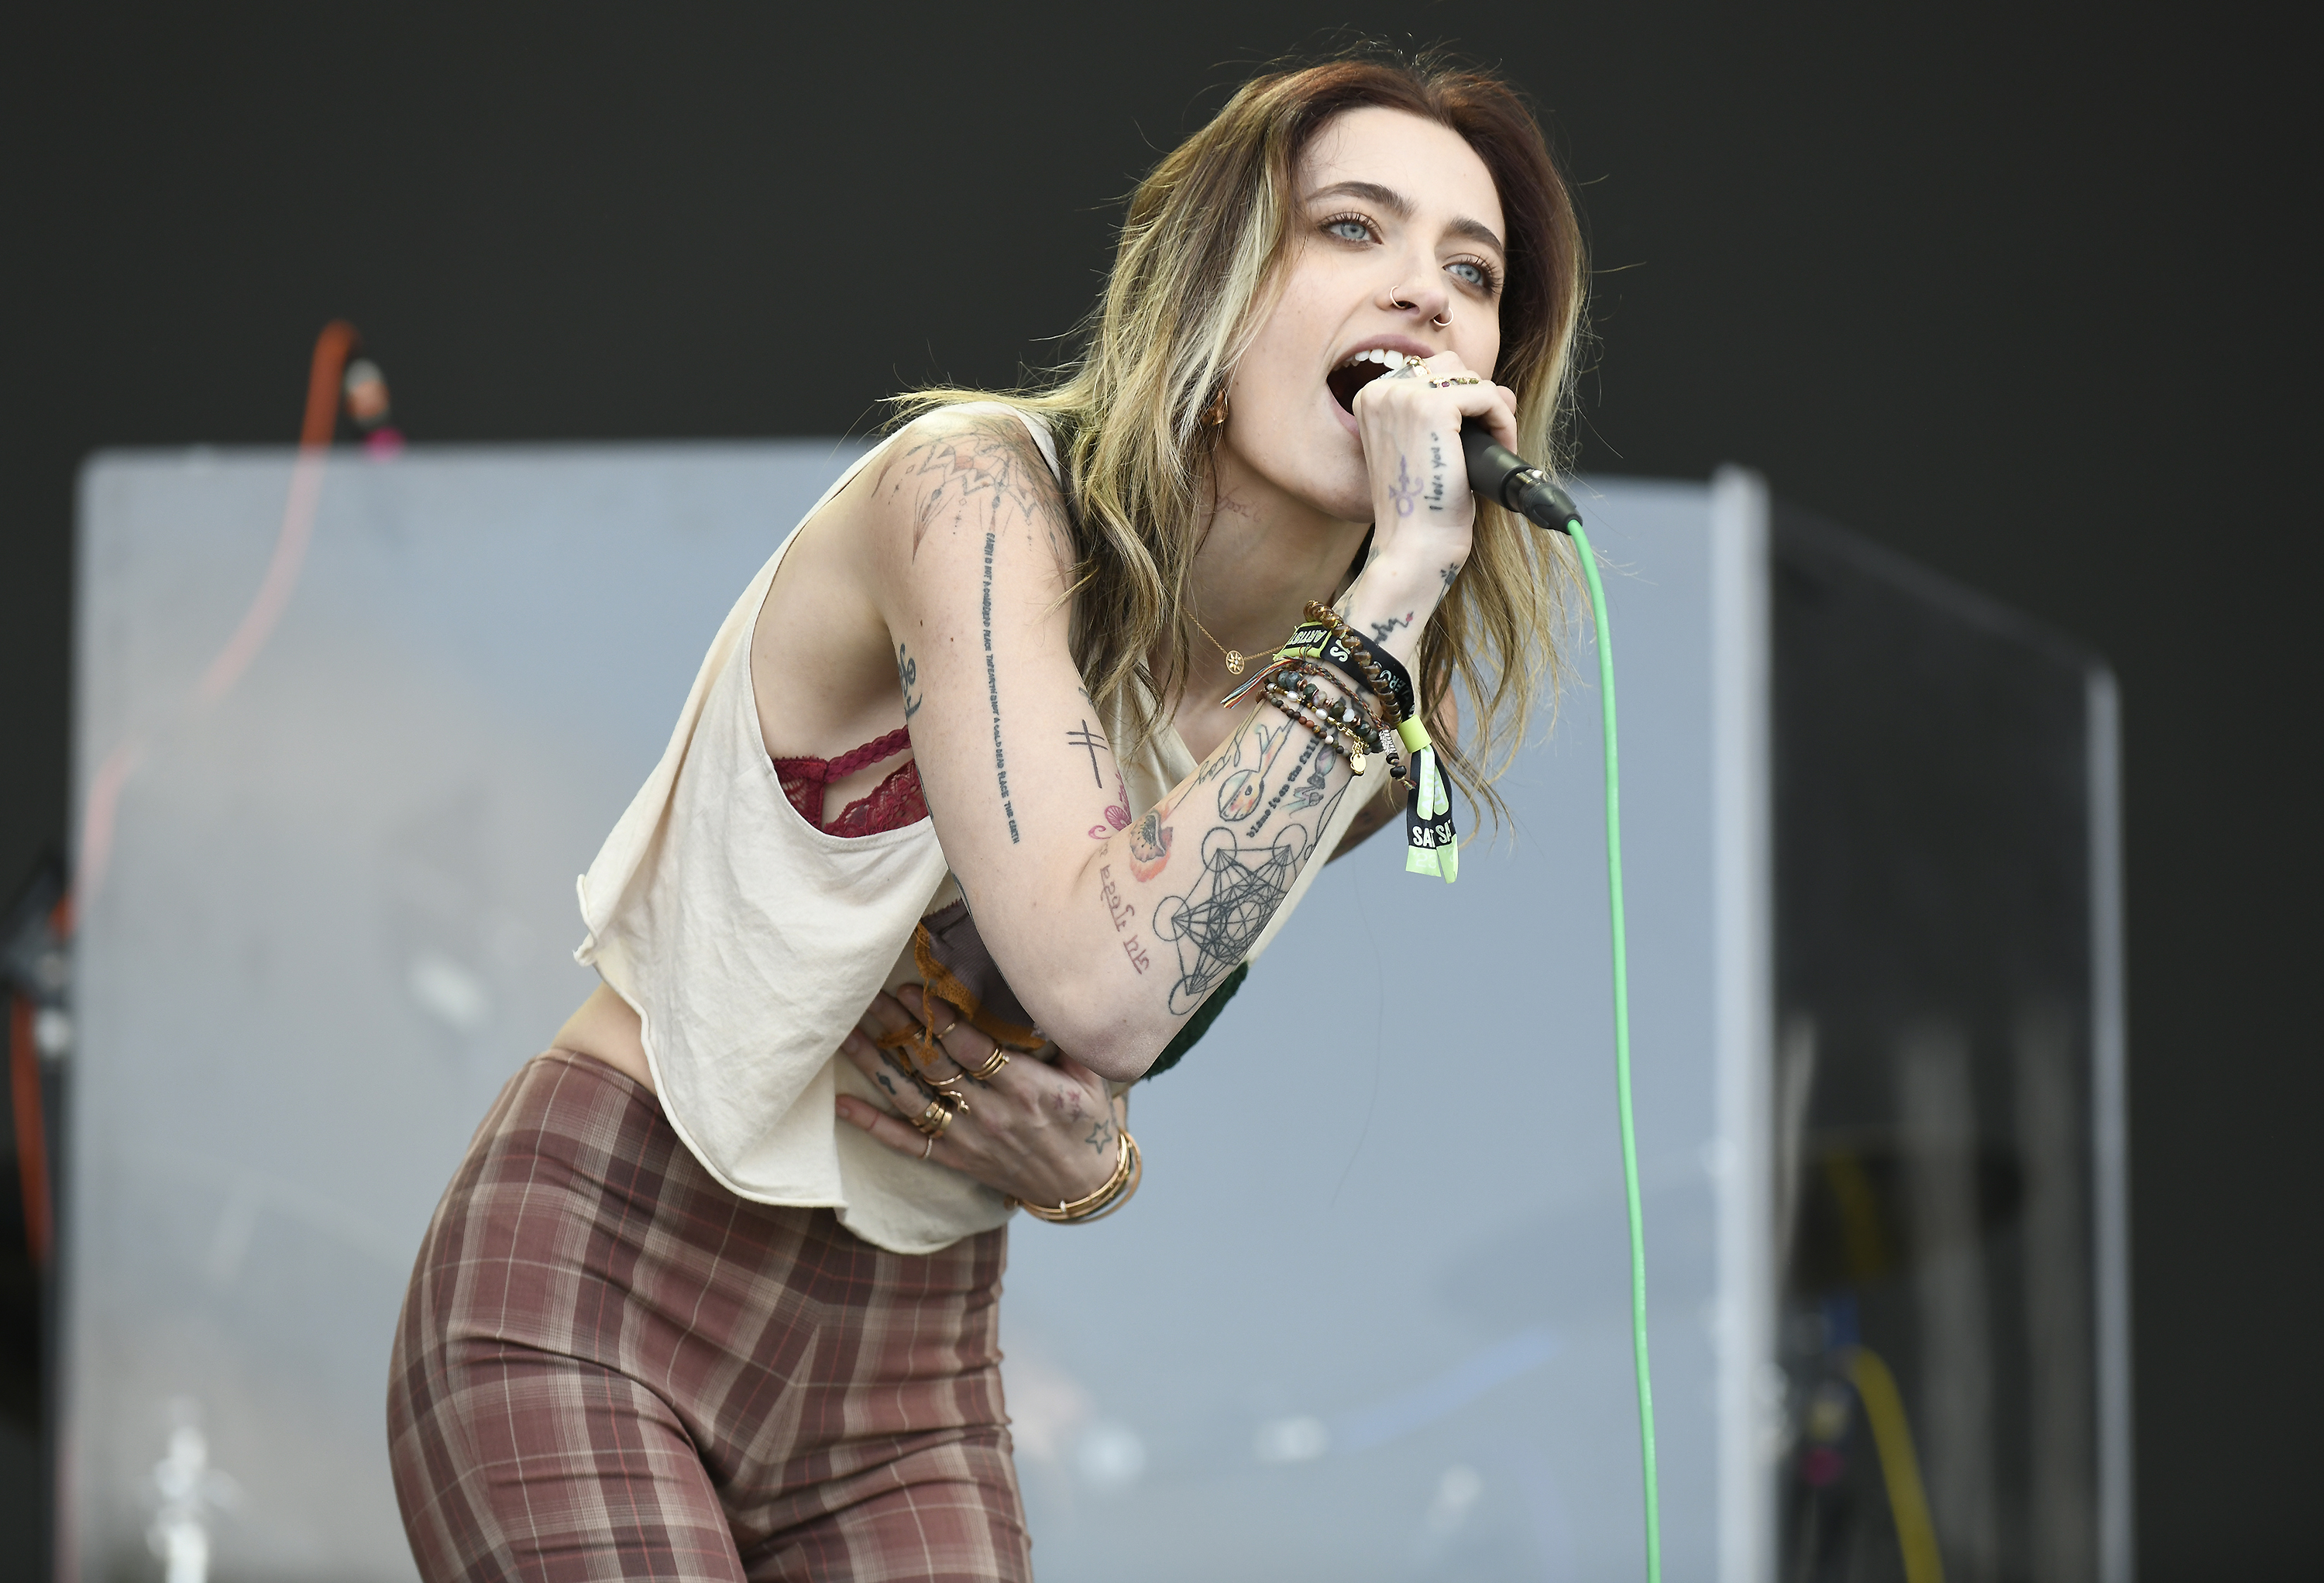 Paris Jackson performs during the 2023 BottleRock Napa Valley festival at Napa Valley Expo on May 27, 2023 in Napa, California | Source: Getty Images